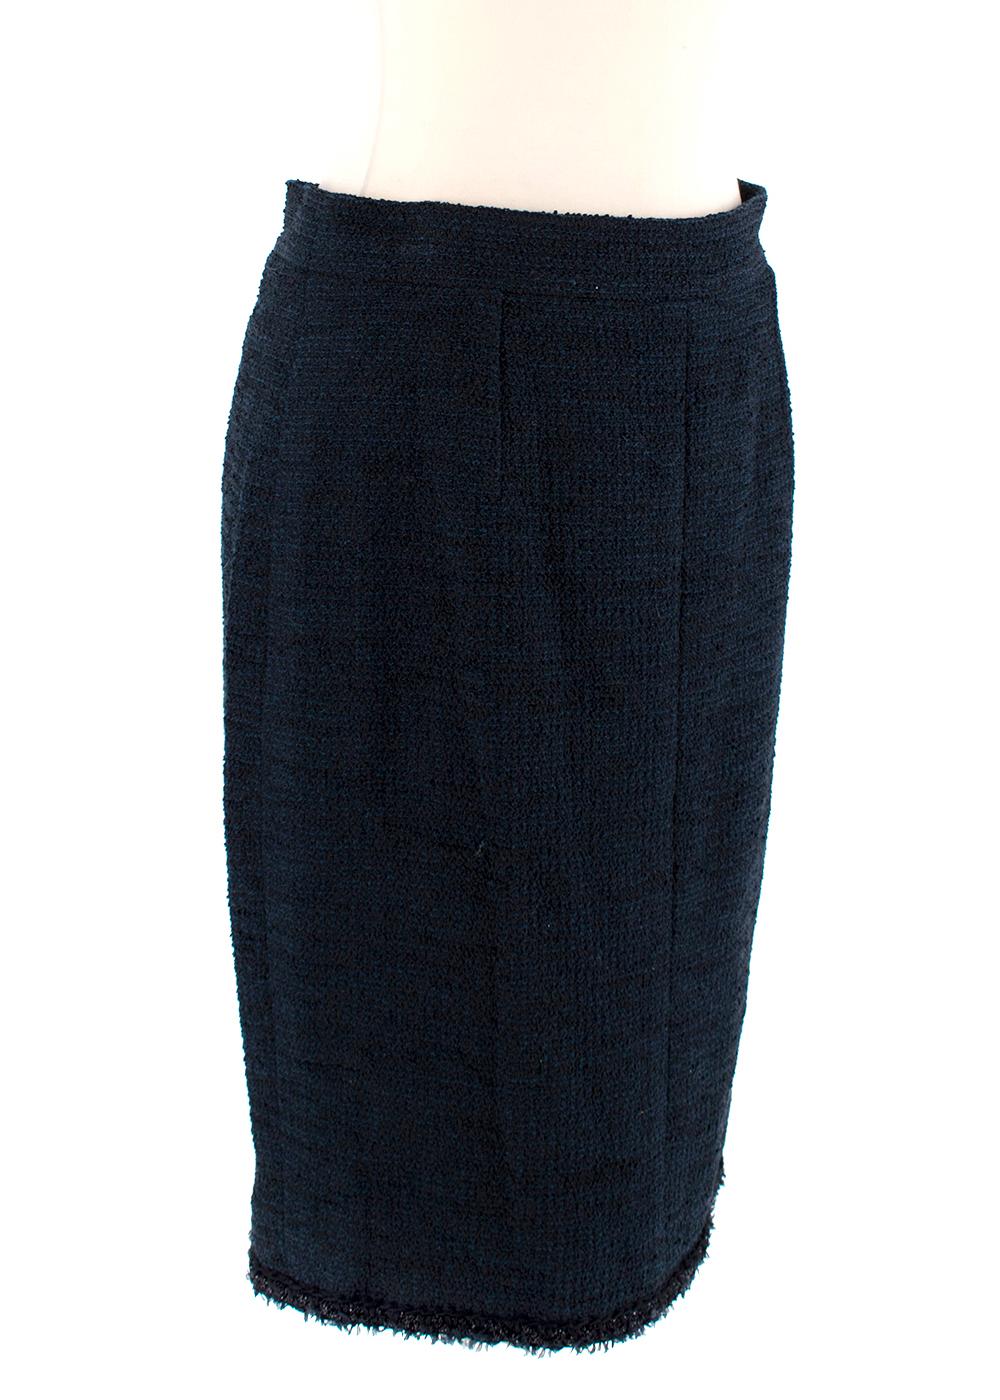 Chanel Black & Blue Boucle Tweed Pencil Skirt

- Cotton blend boulce tweed in black with a blue thread shot through 
- Tonal braided lurex detail to the hem with frayed embellishments
- Concealed back zip and hook & eye closure
- Single vent